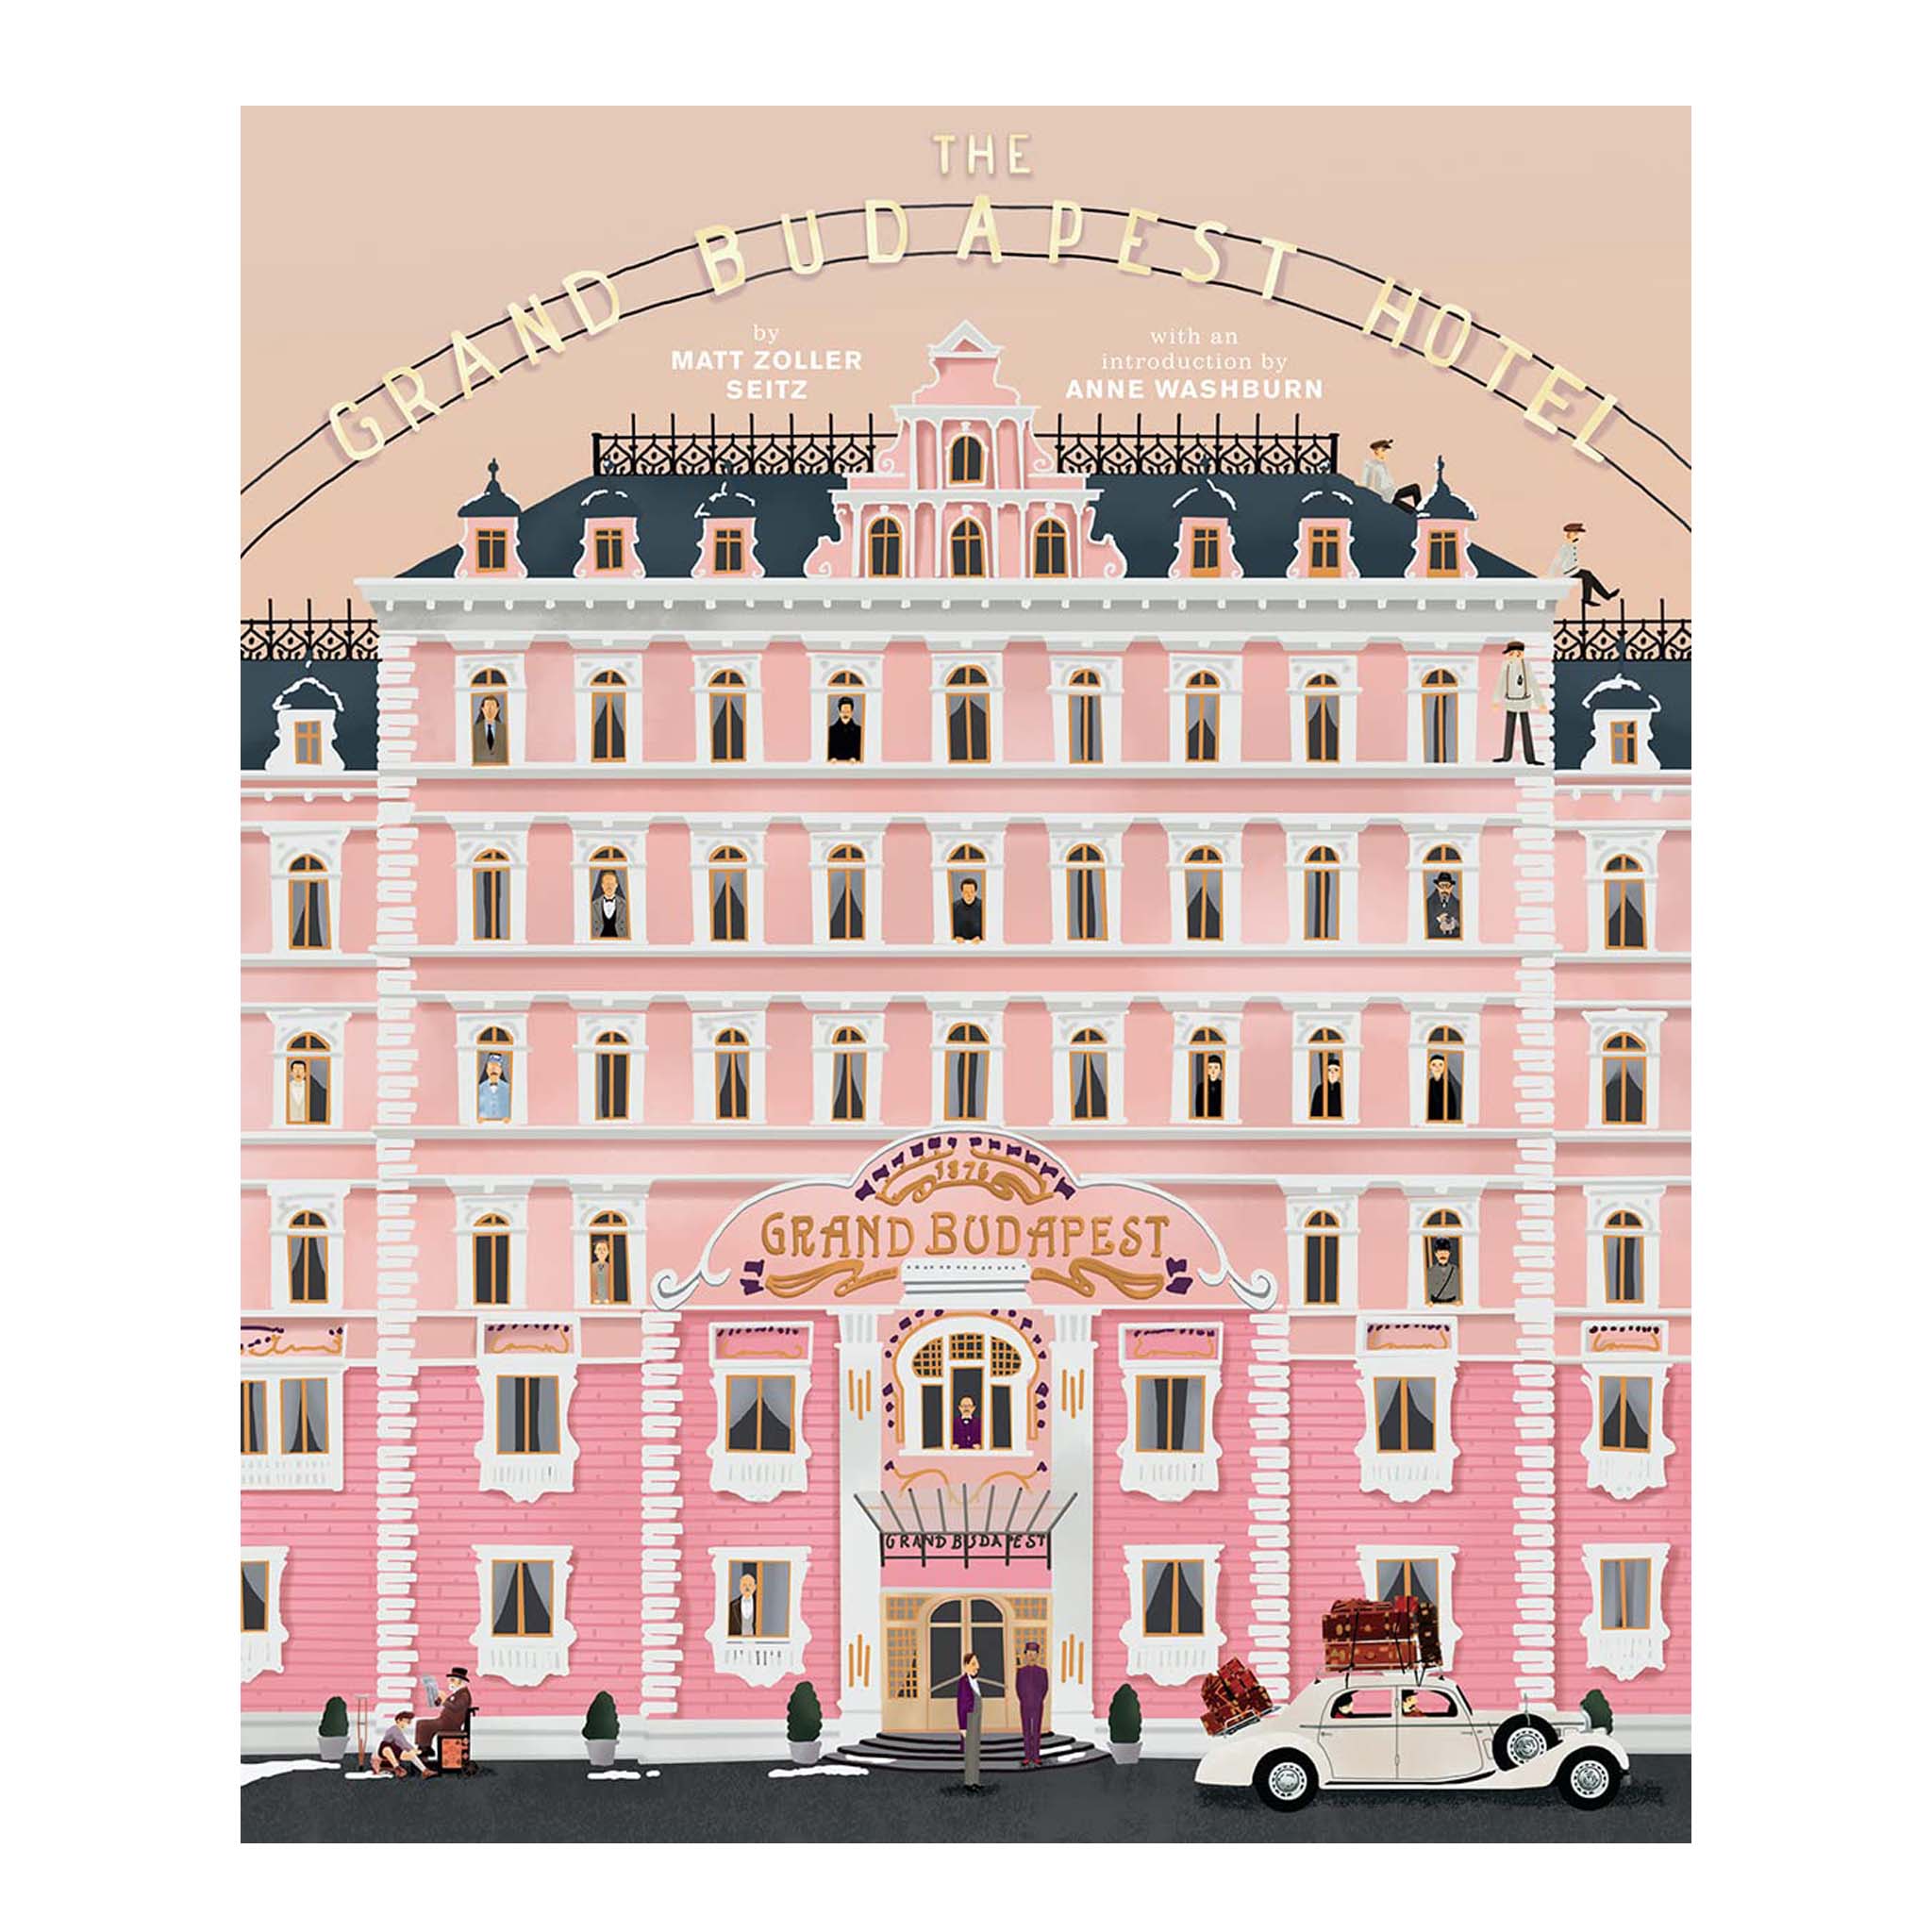 THE WES ANDERSON COLLECTION: THE GRAND BUDAPEST HOTEL